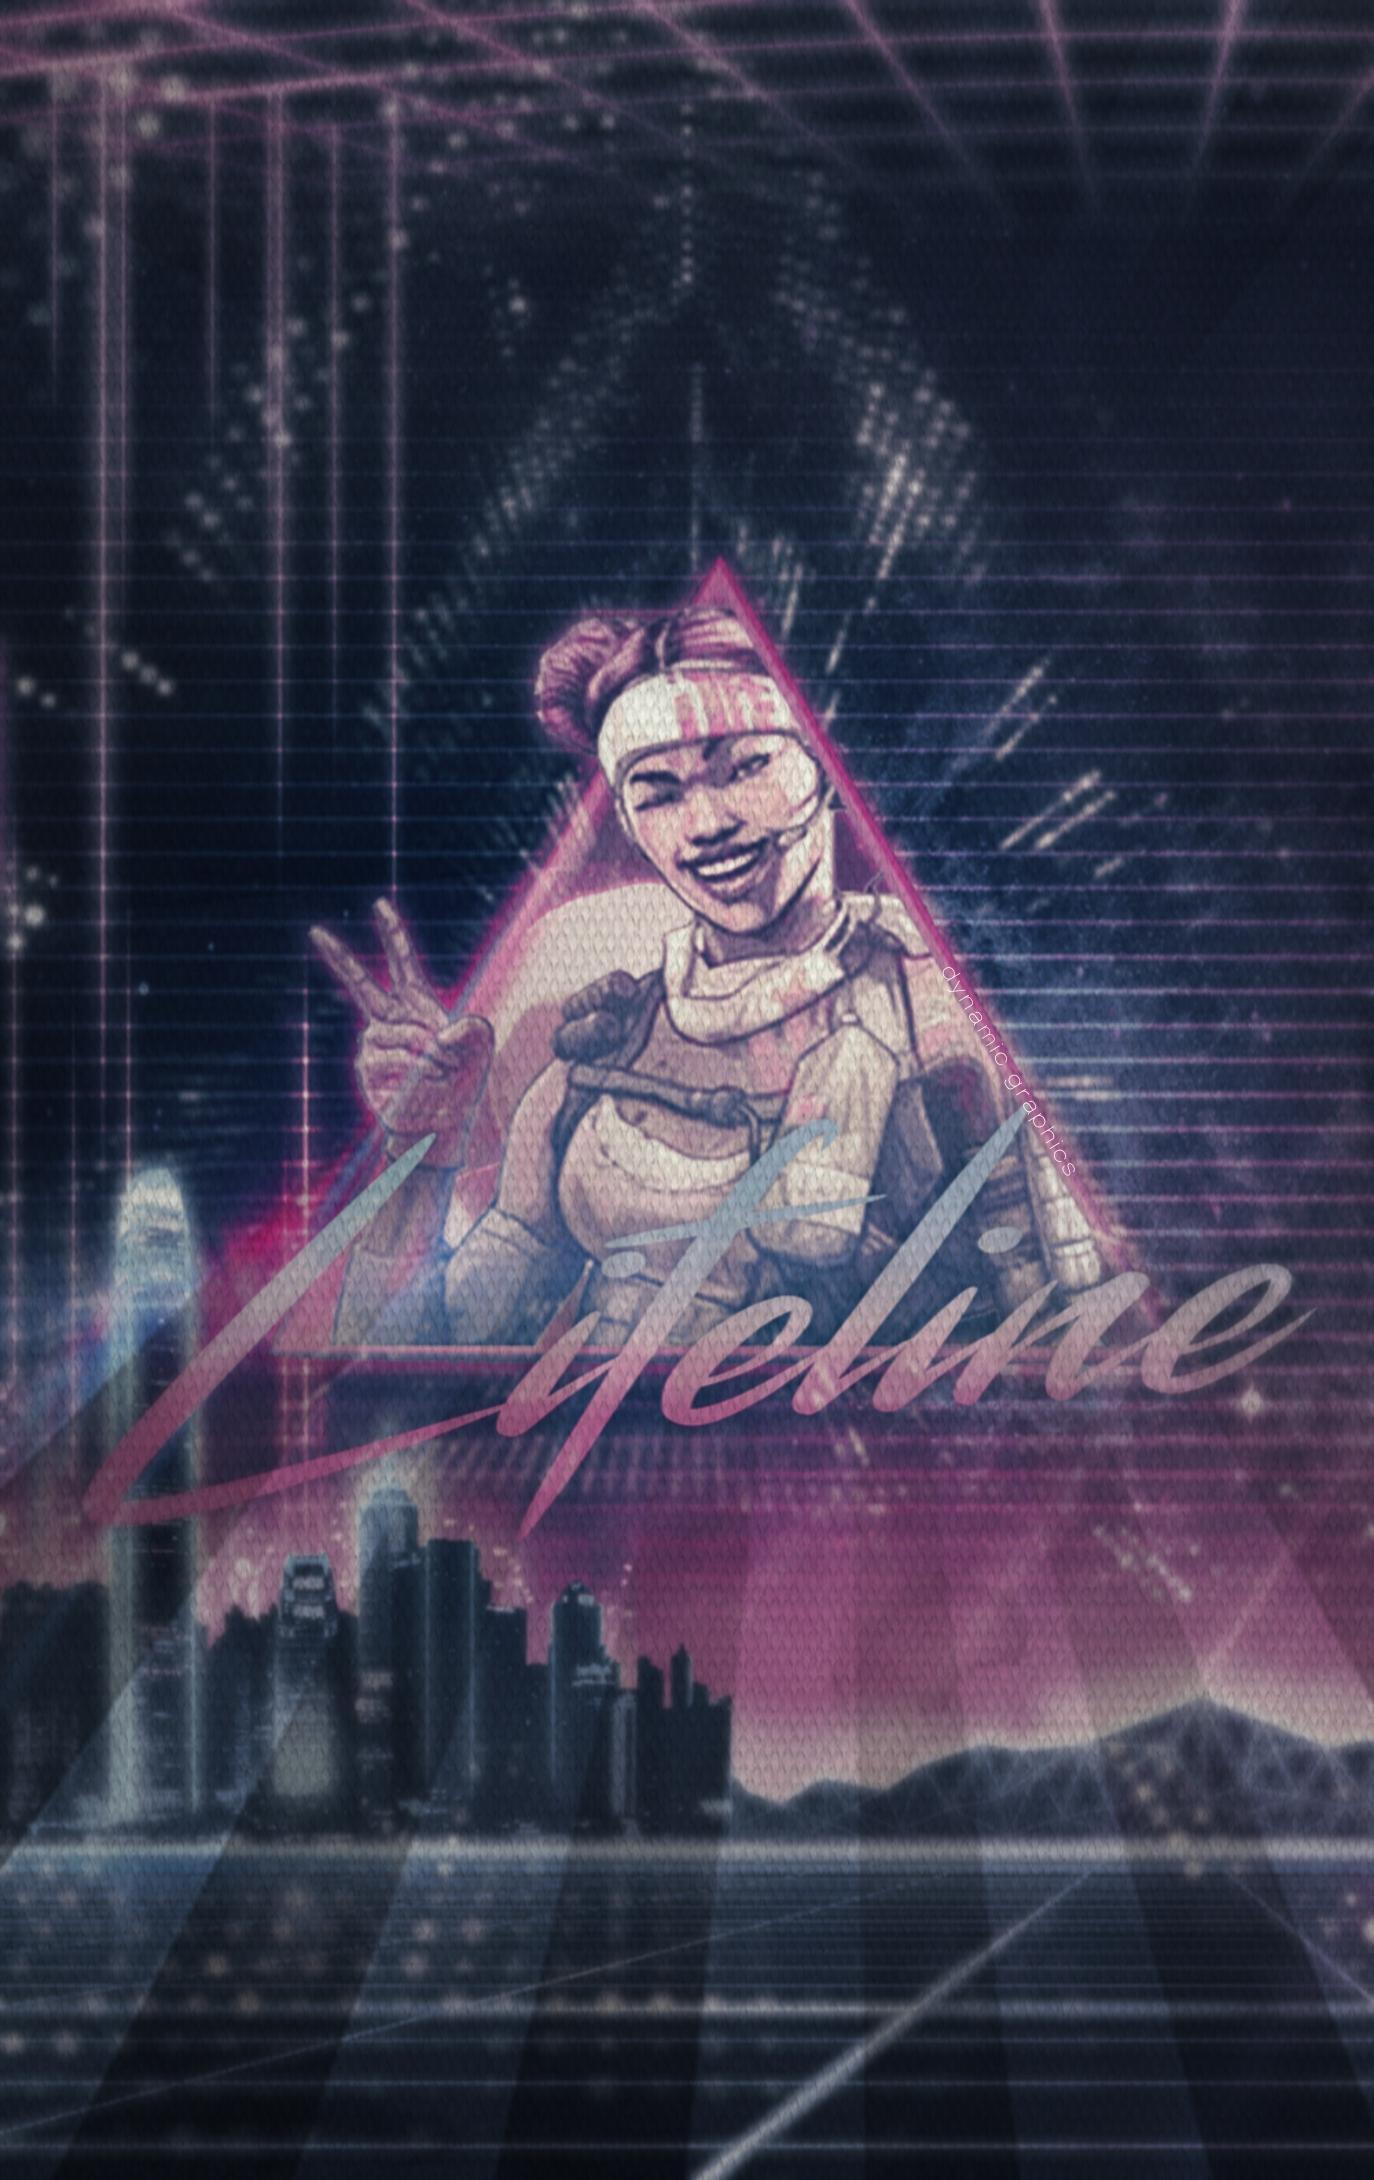 Synthwave Style Lifeline Wallpaper For Phones. Feel Free To